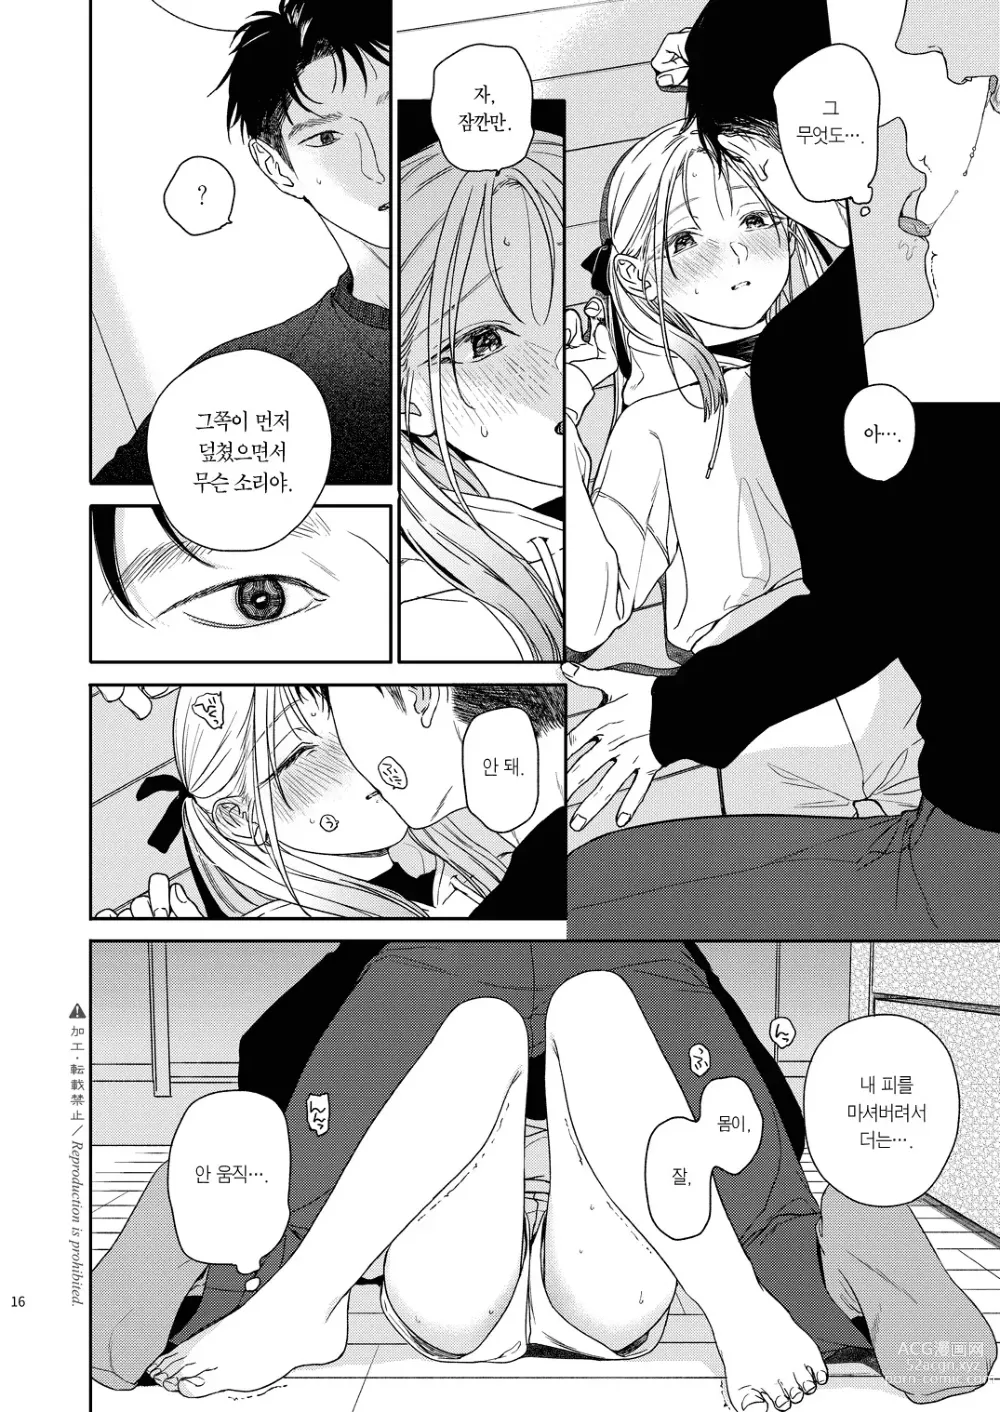 Page 17 of doujinshi 카타미와 월맹